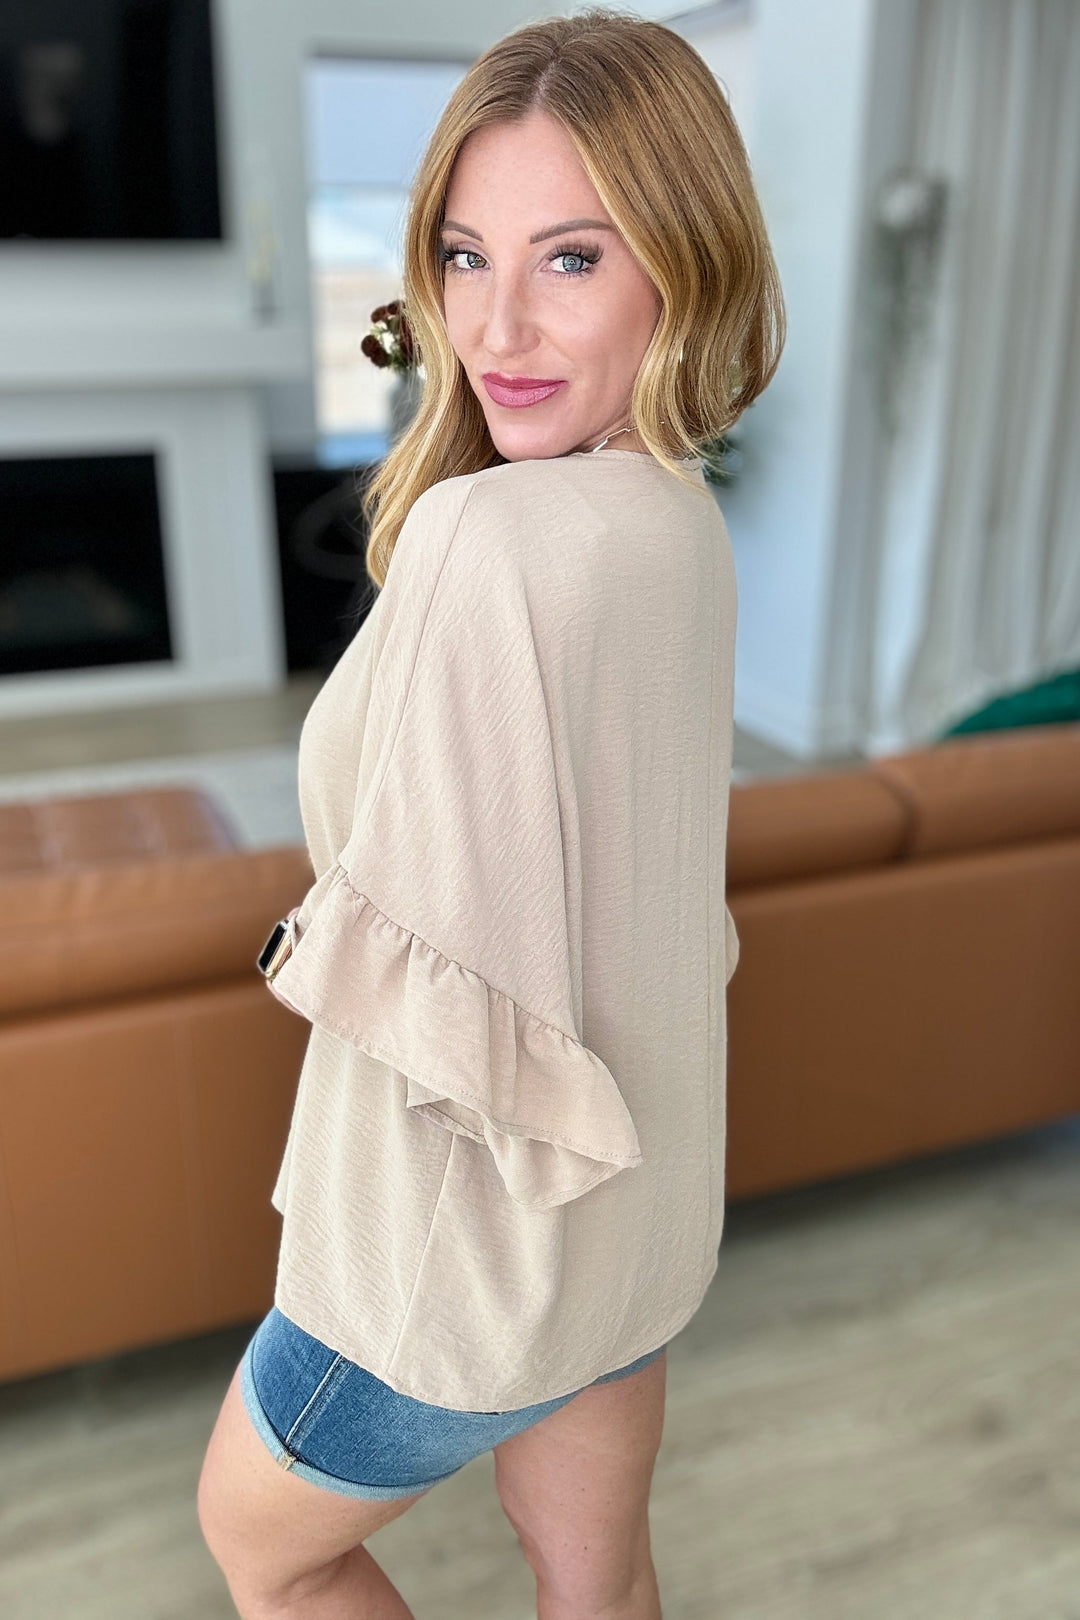 Airflow Peplum Ruffle Sleeve Top in Taupe-Short Sleeve Tops-Inspired by Justeen-Women's Clothing Boutique in Chicago, Illinois